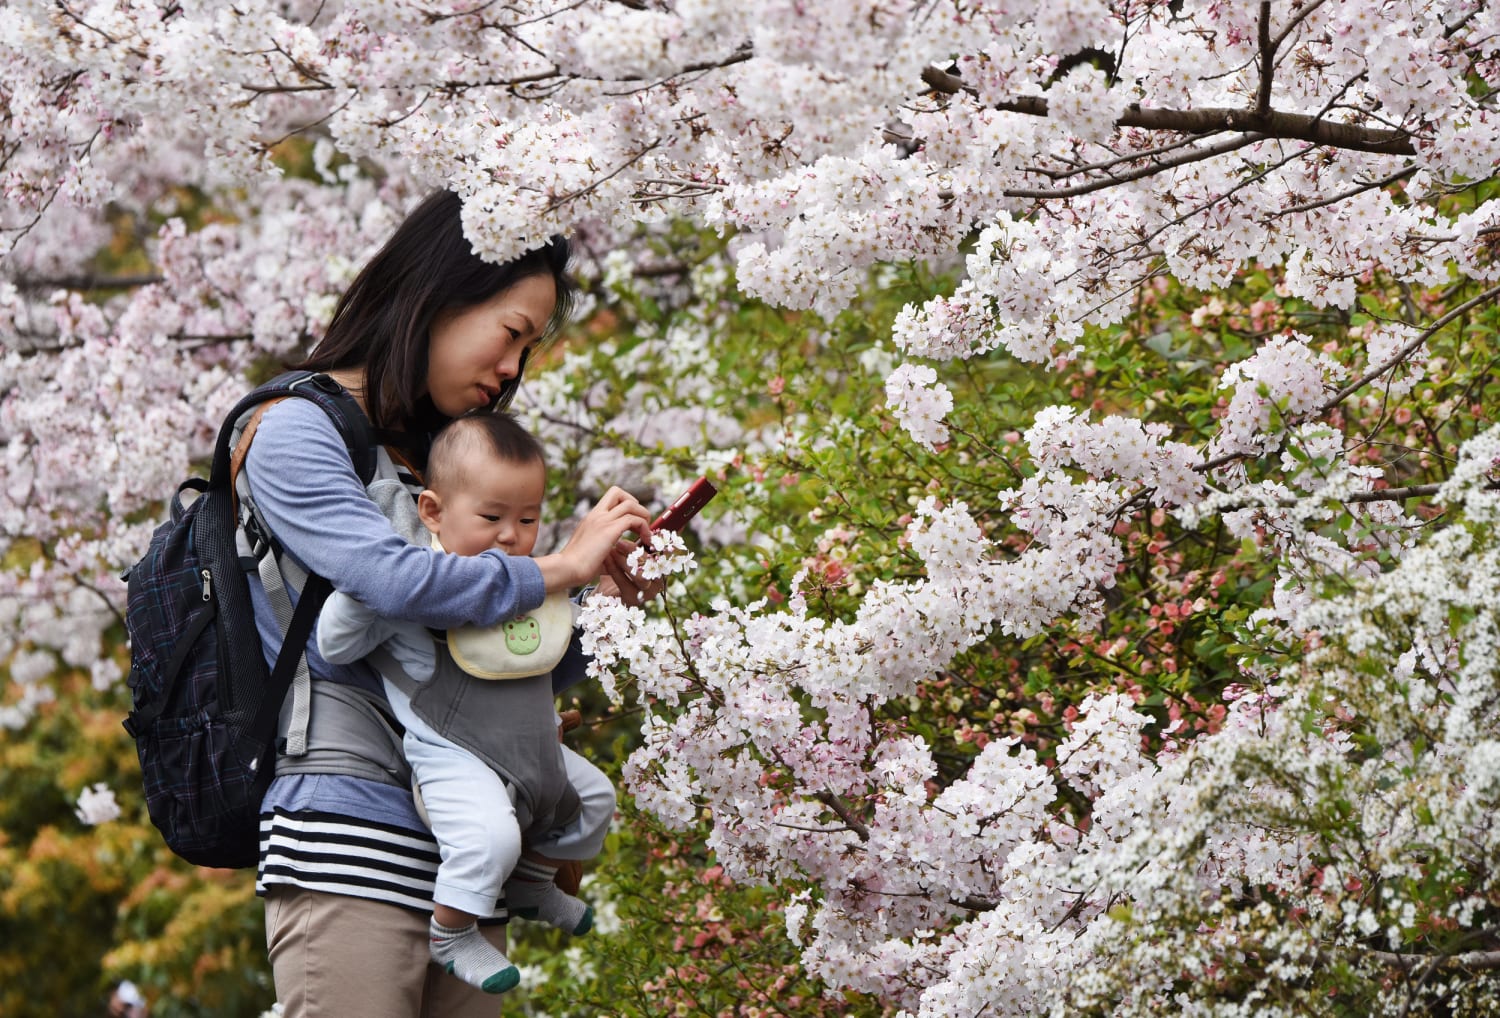 Japan demographic woes deepen as birth rate hits record low